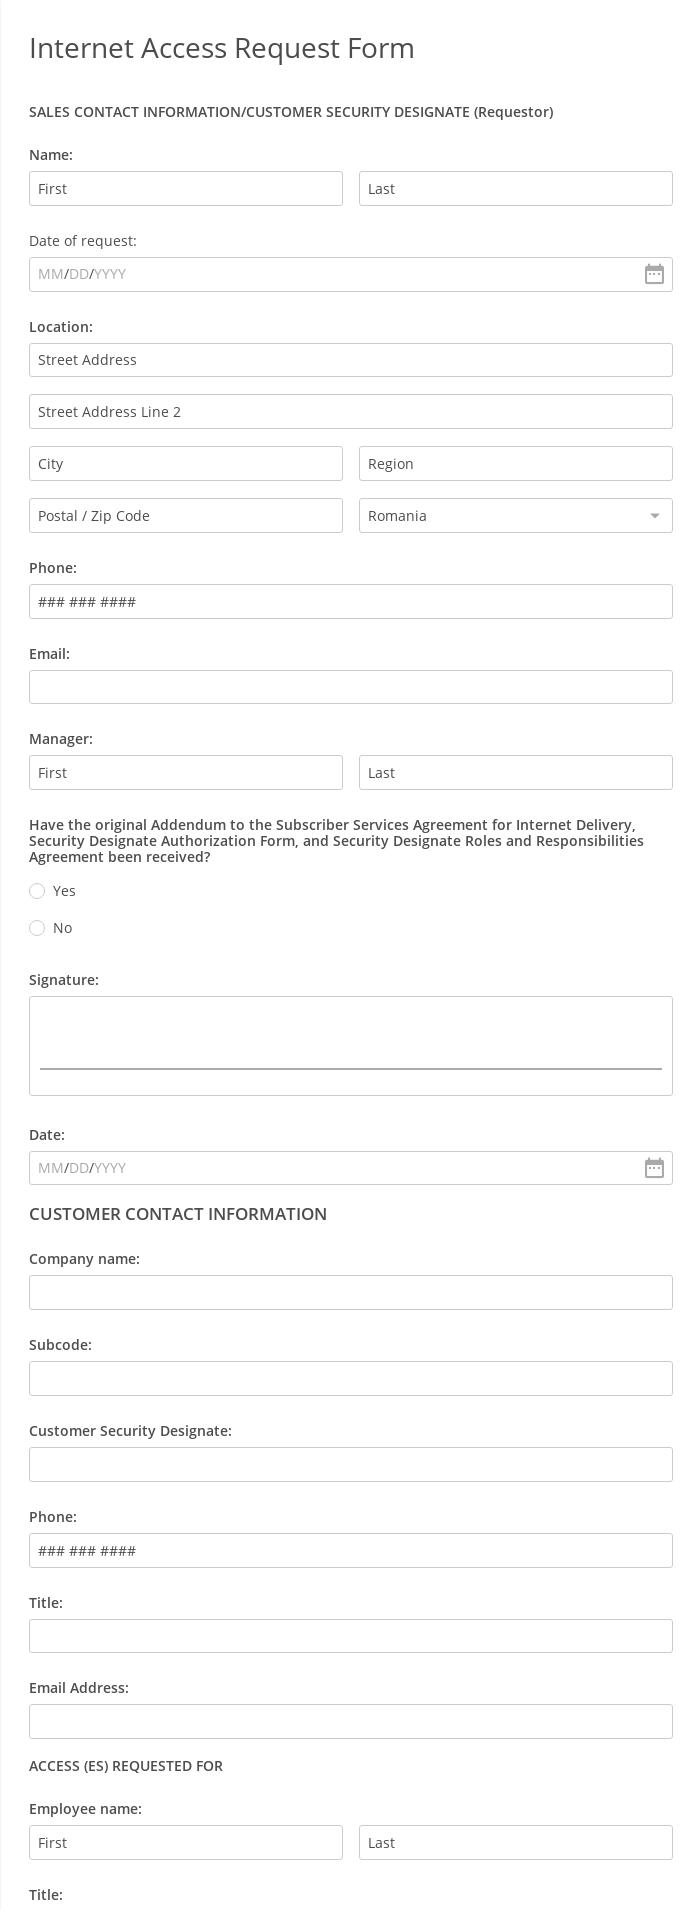 Internet Access Request Form